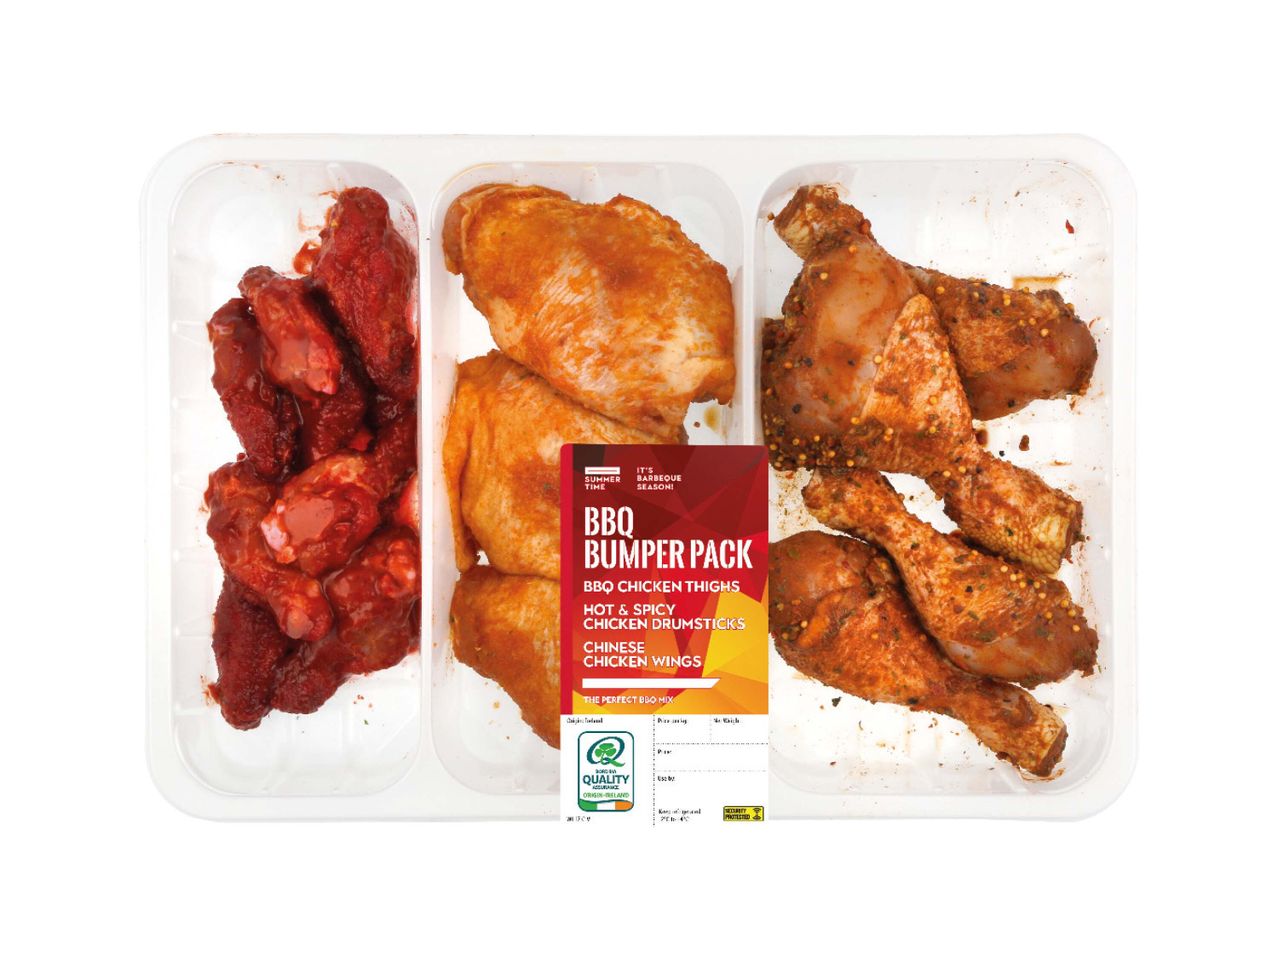 Go to full screen view: BBQ Chicken Bumper Pack - Image 1